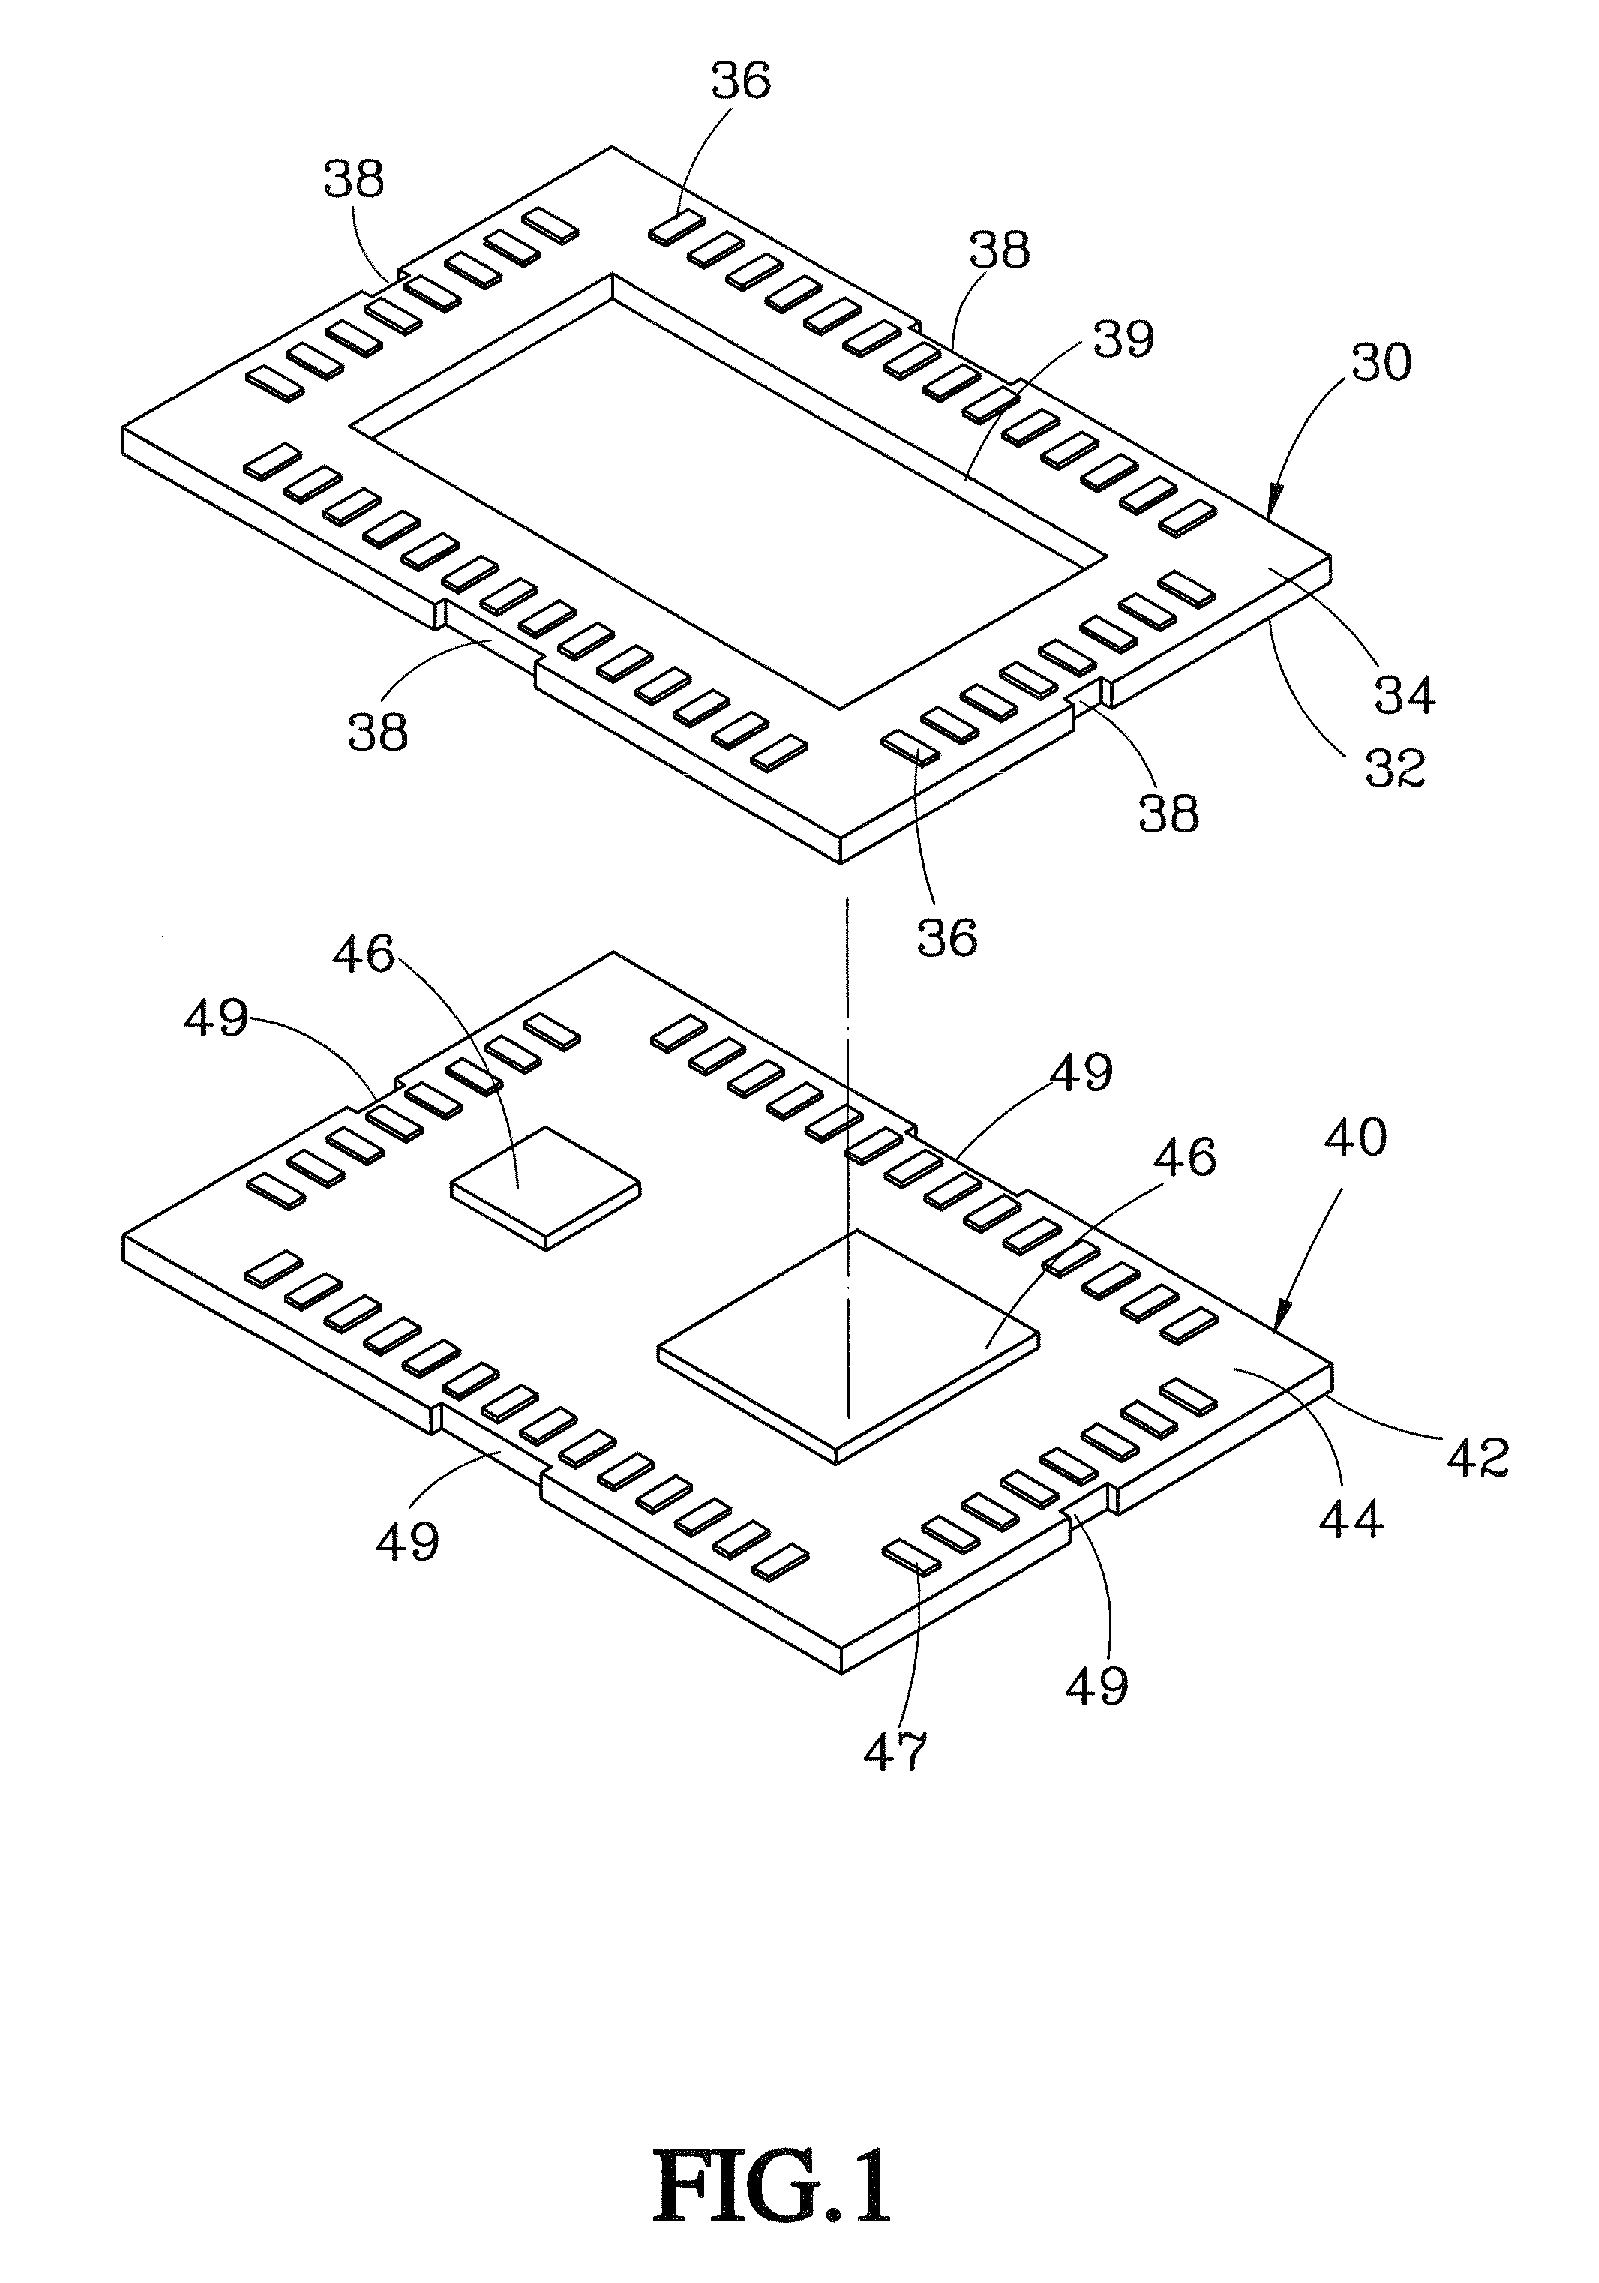 Communication module package assembly